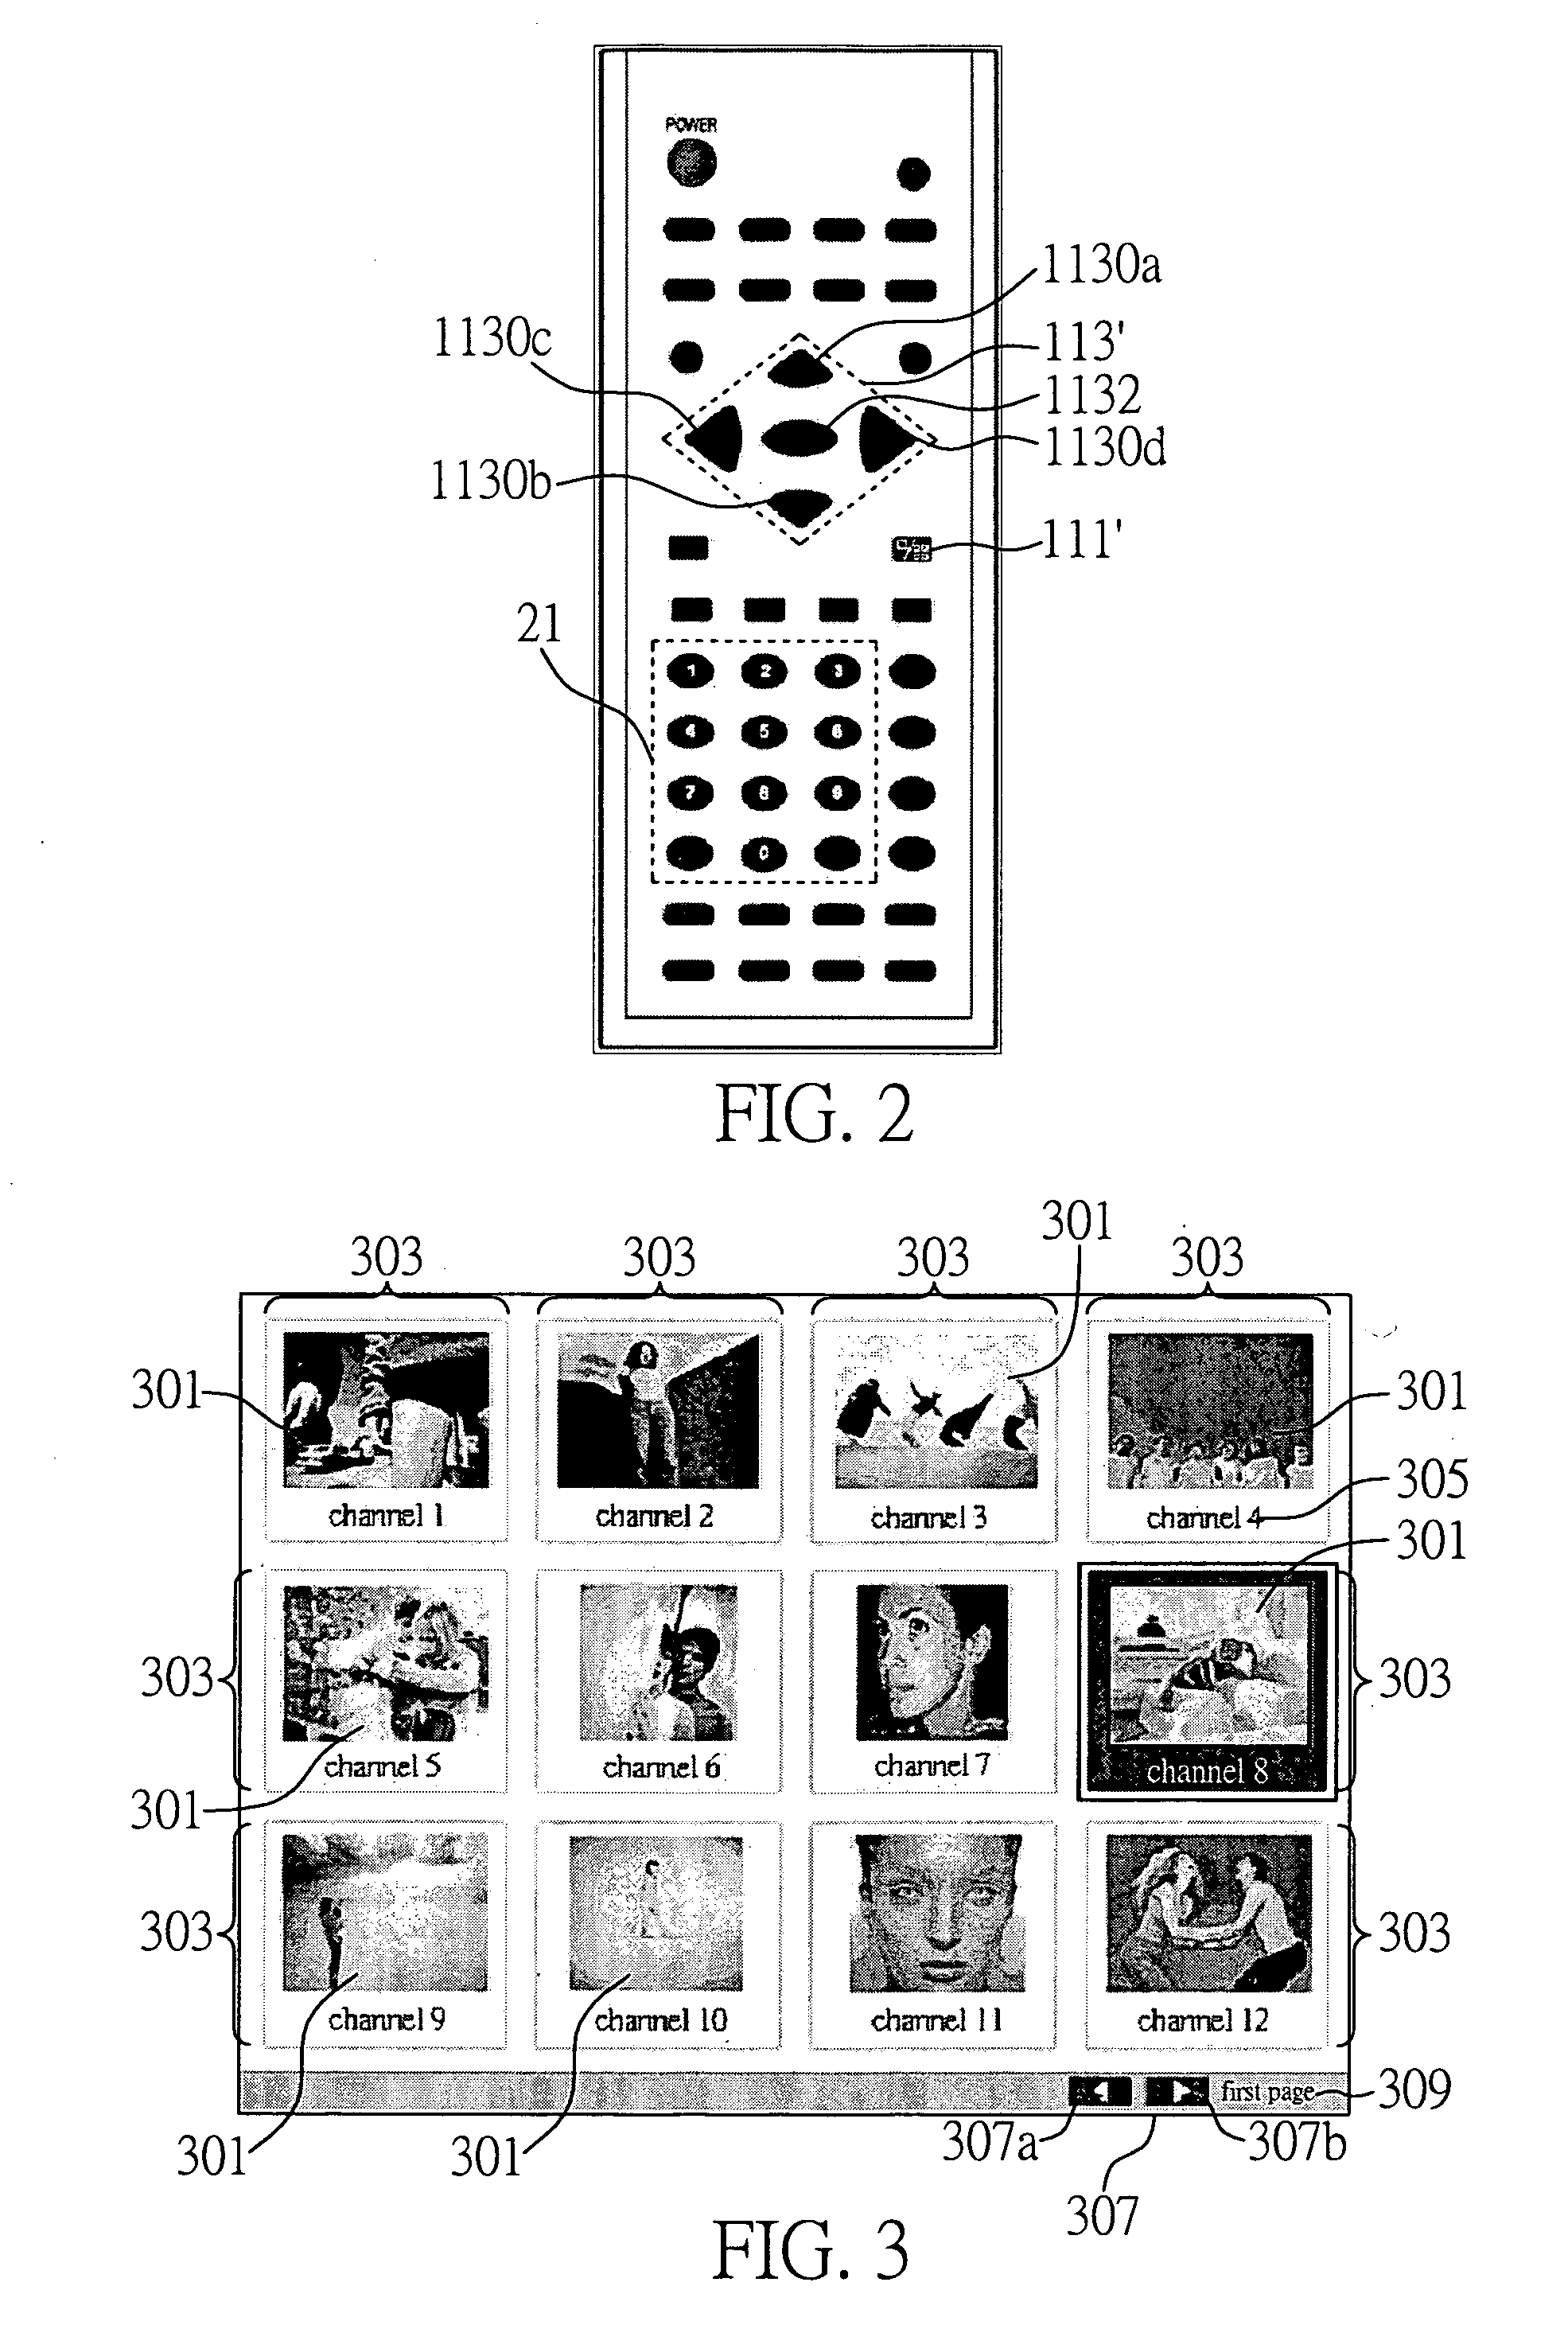 Video browsing system and method